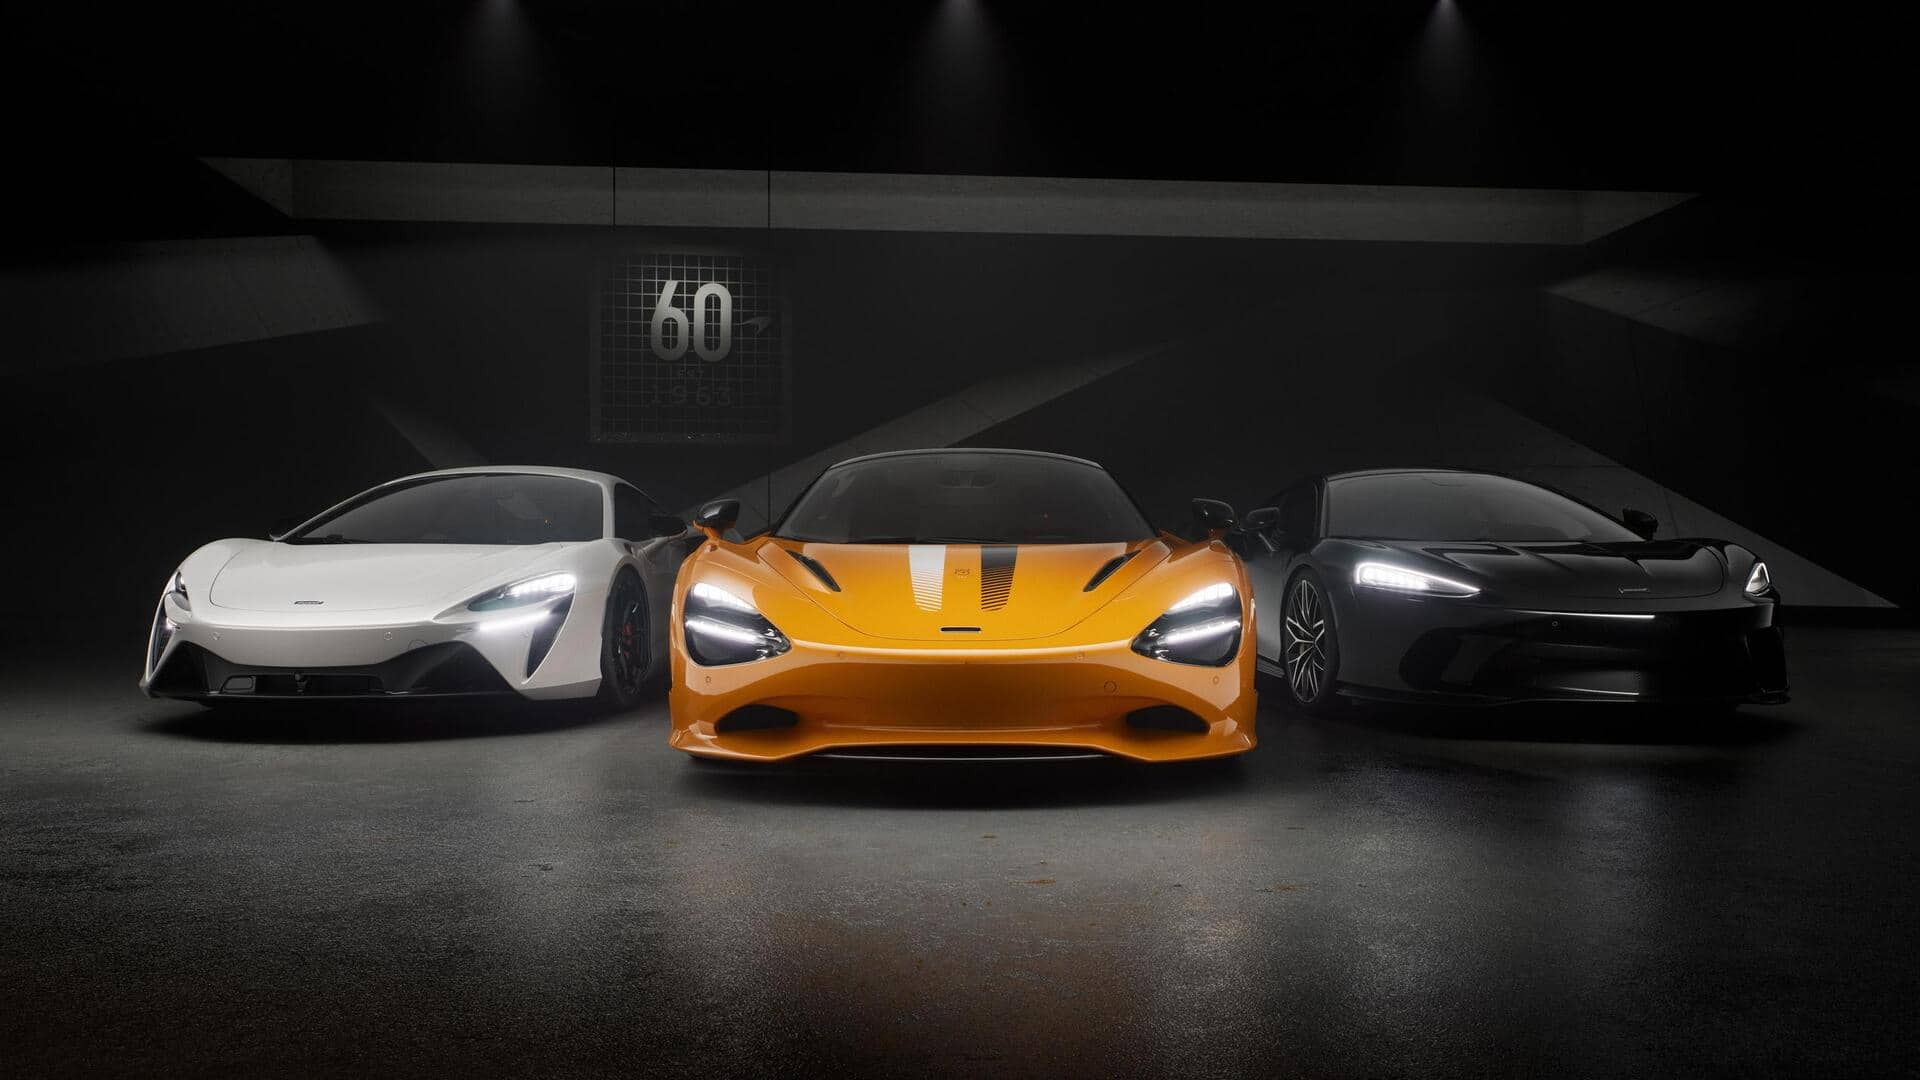 McLaren commemorates 60th anniversary with special stripes and logos